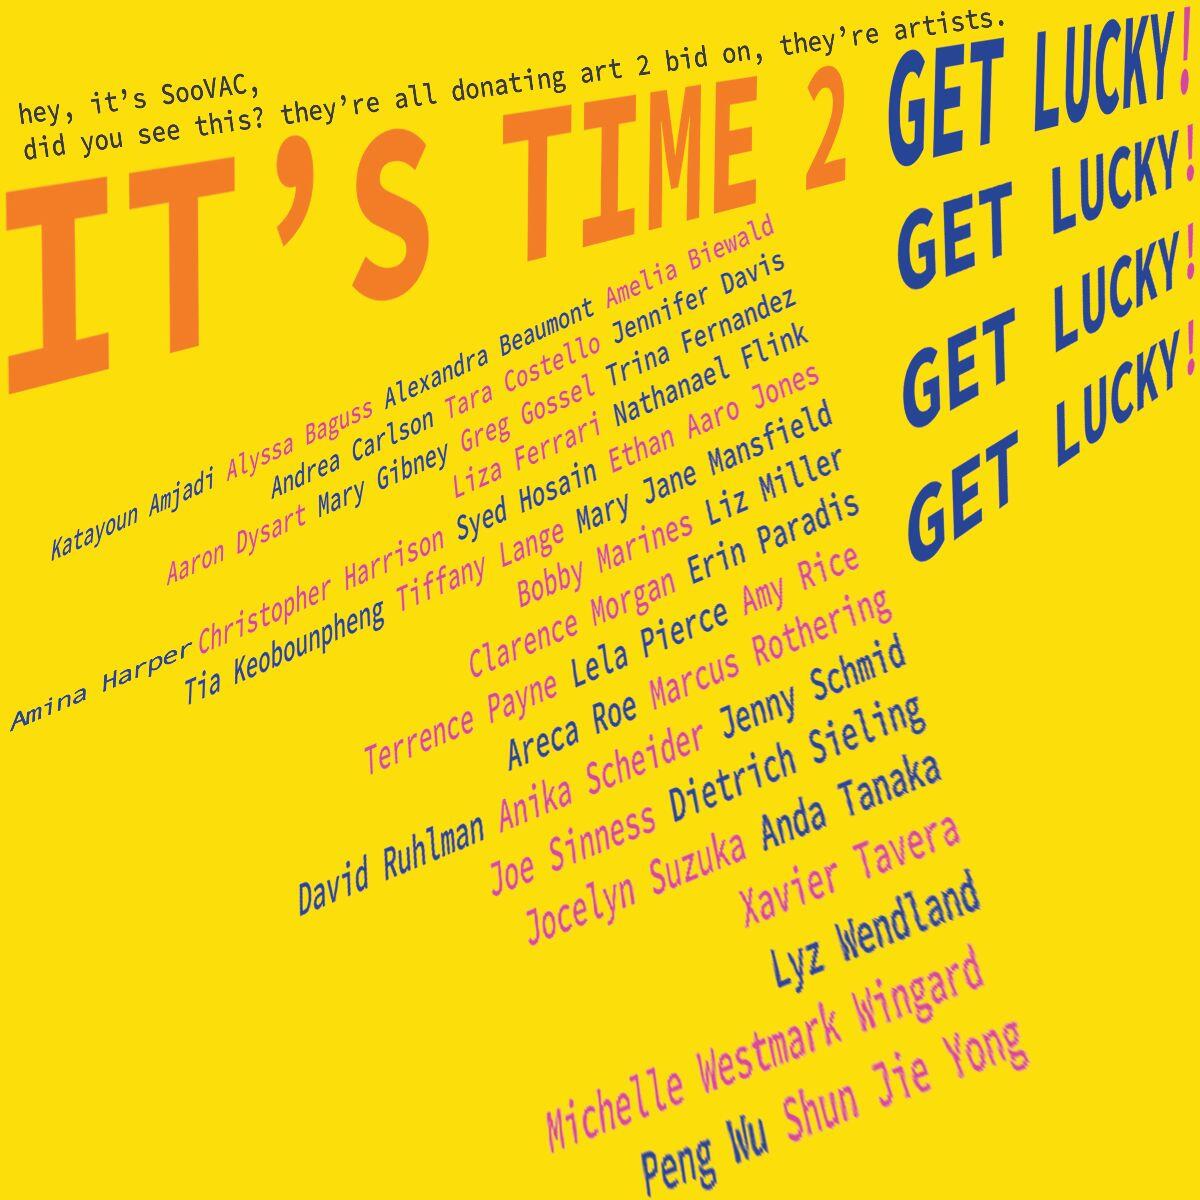 Yellow image with "IT'S TIME 2 GET LUCKY!", with the latter two words repeated below three times. An artist list is shown as well.